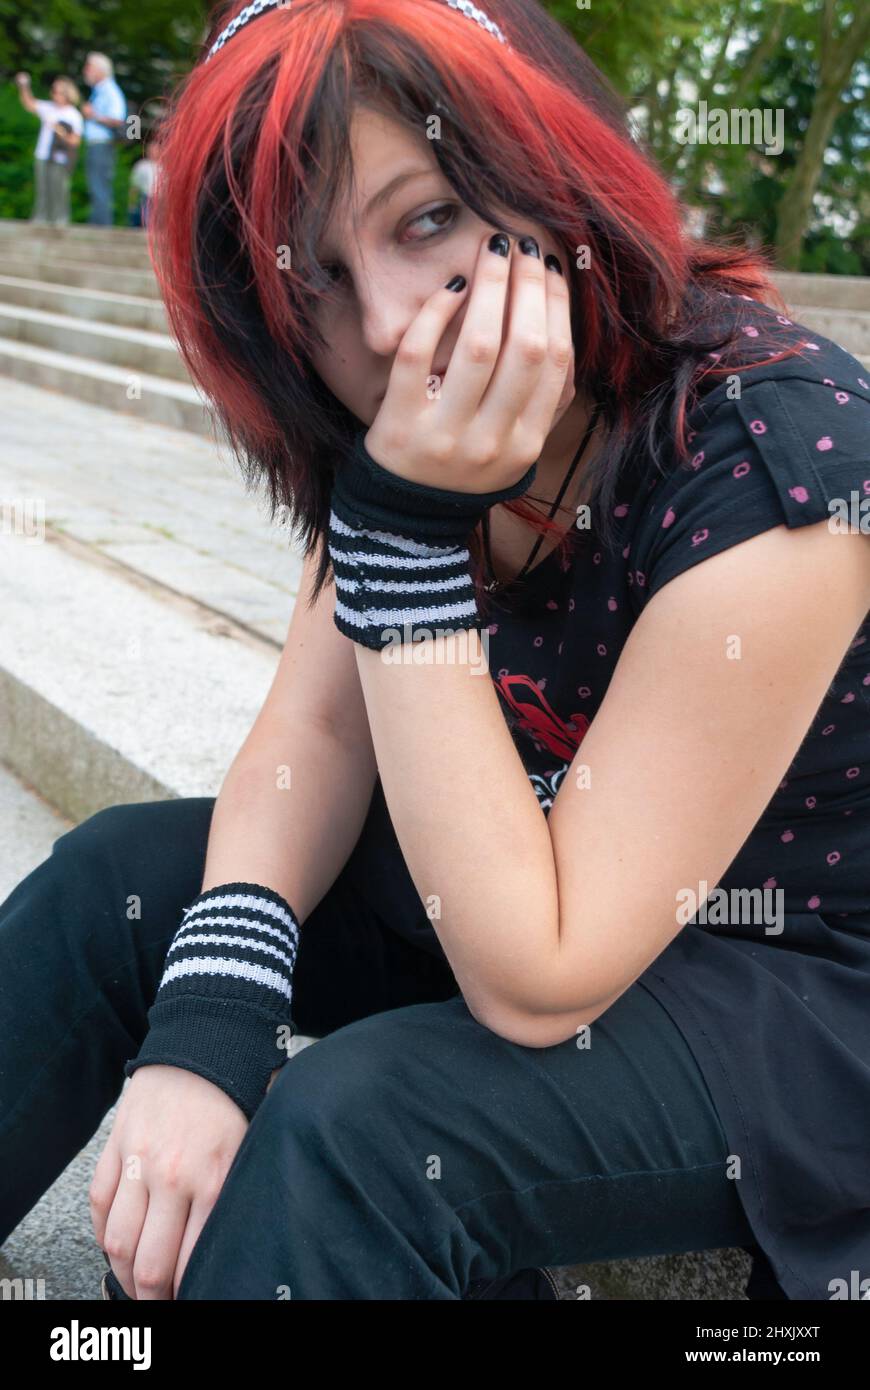 Punk emo girl, young adult with black red hair, sitting on a staircase outdoors, holding her head, looking away, horizontal Stock Photo